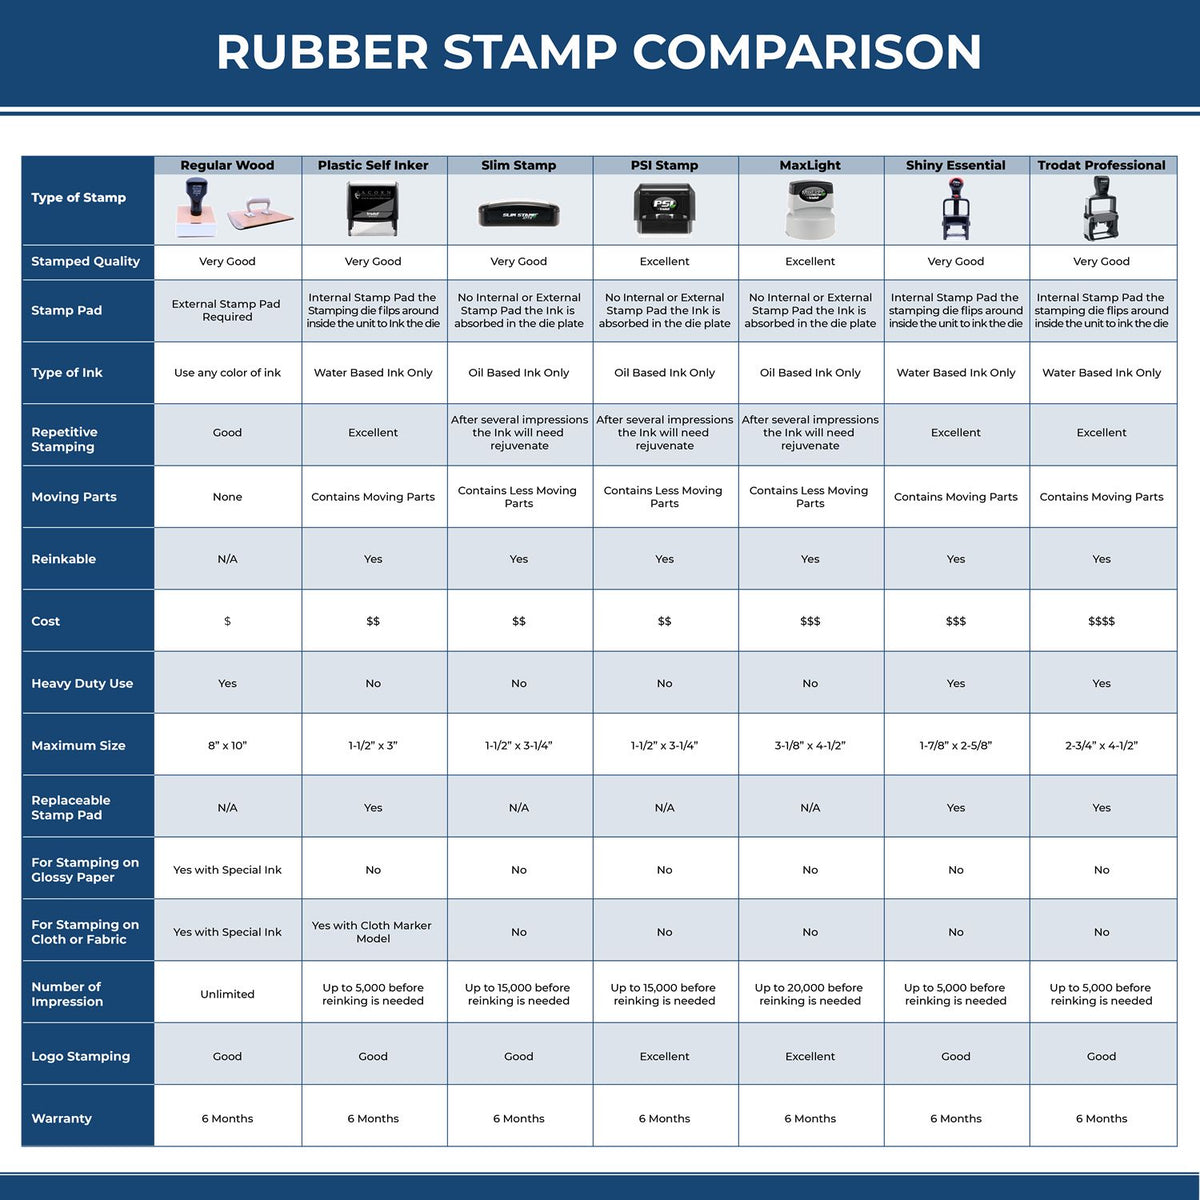 Self-Inking Faxed on Stamp 4093S Rubber Stamp Comparison